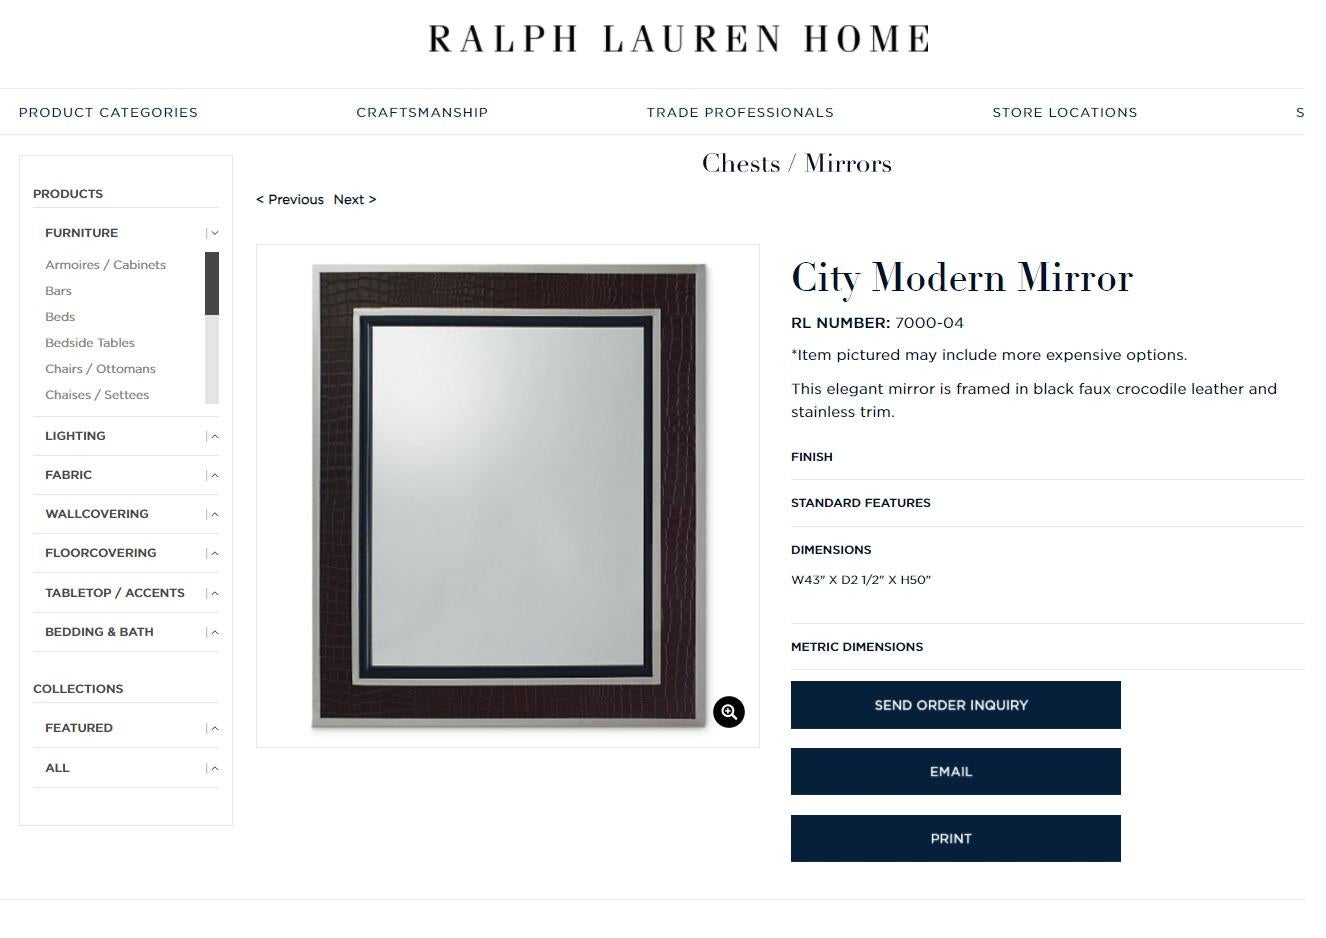 We are delighted to offer for sale 1 of 2 Brand new Ralph Lauren RRP £6,800 City Modern black faux Crocodile leather with polished chrome frames mirrors

They are brand new ex display pieces, bought for a project but never used, as such they have